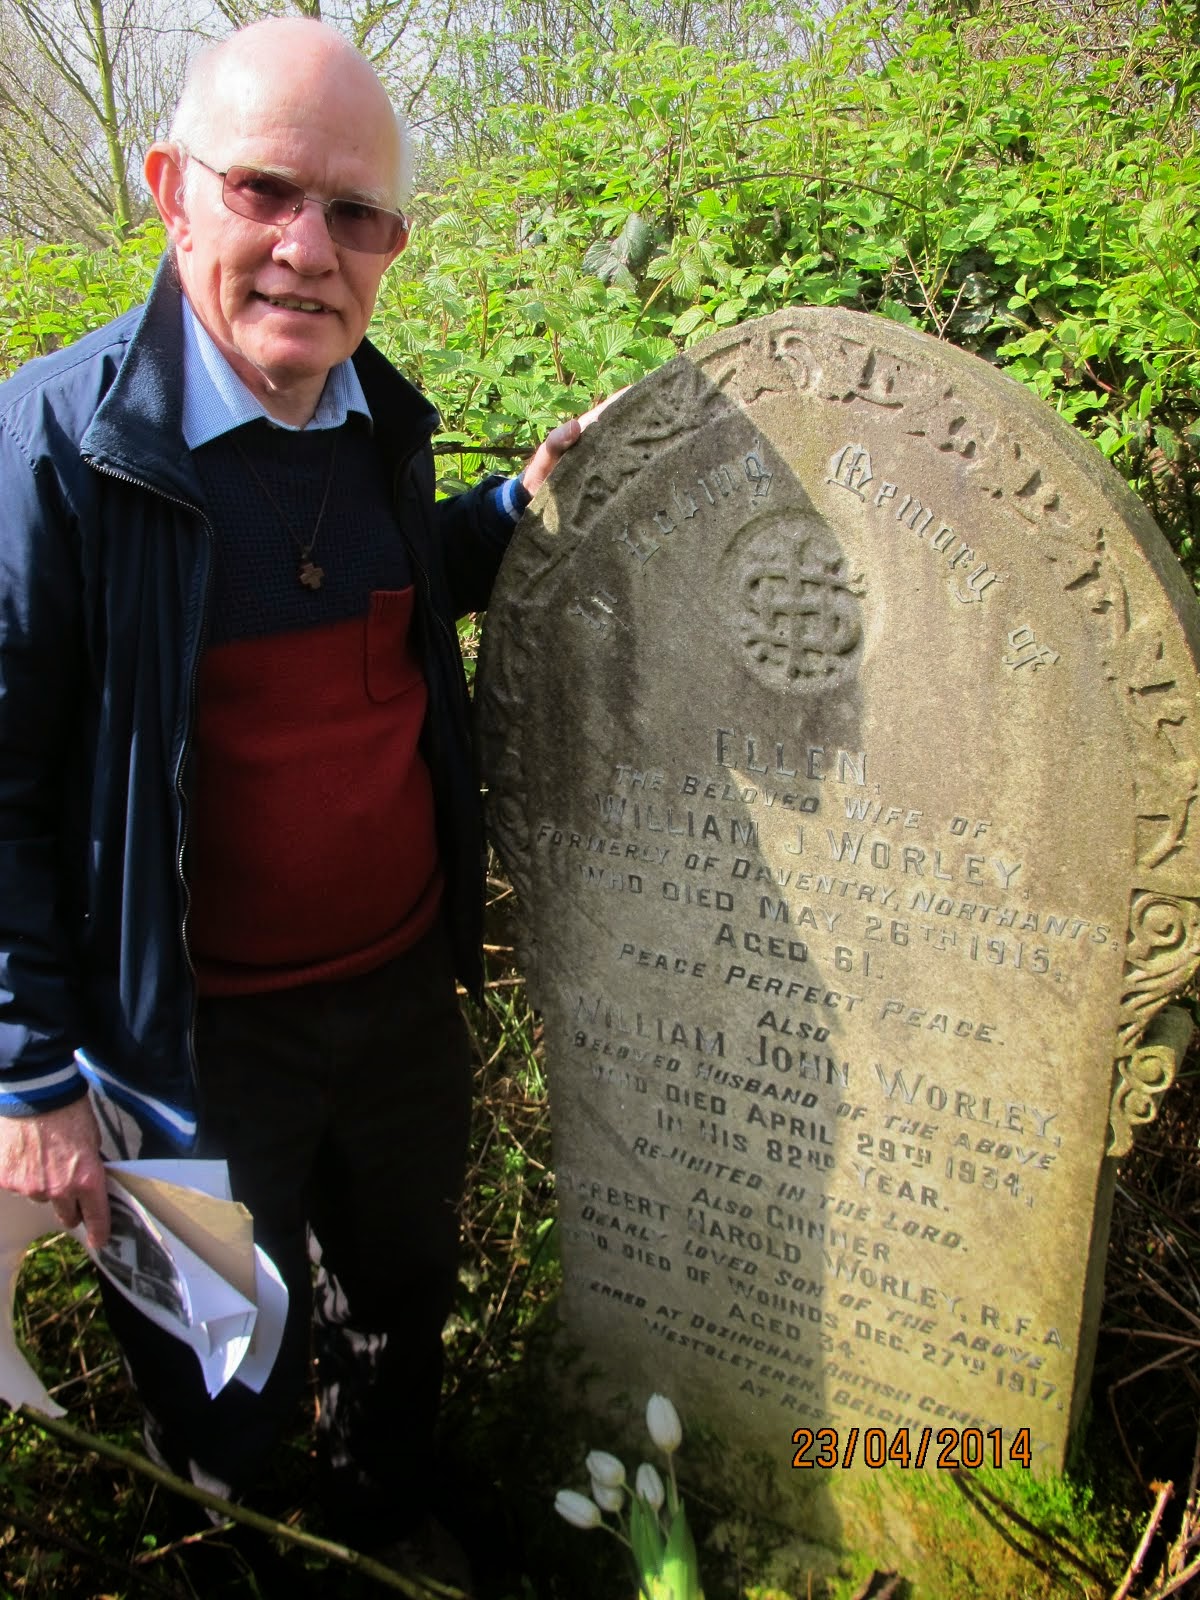 John Woodhouse and the Worley grave